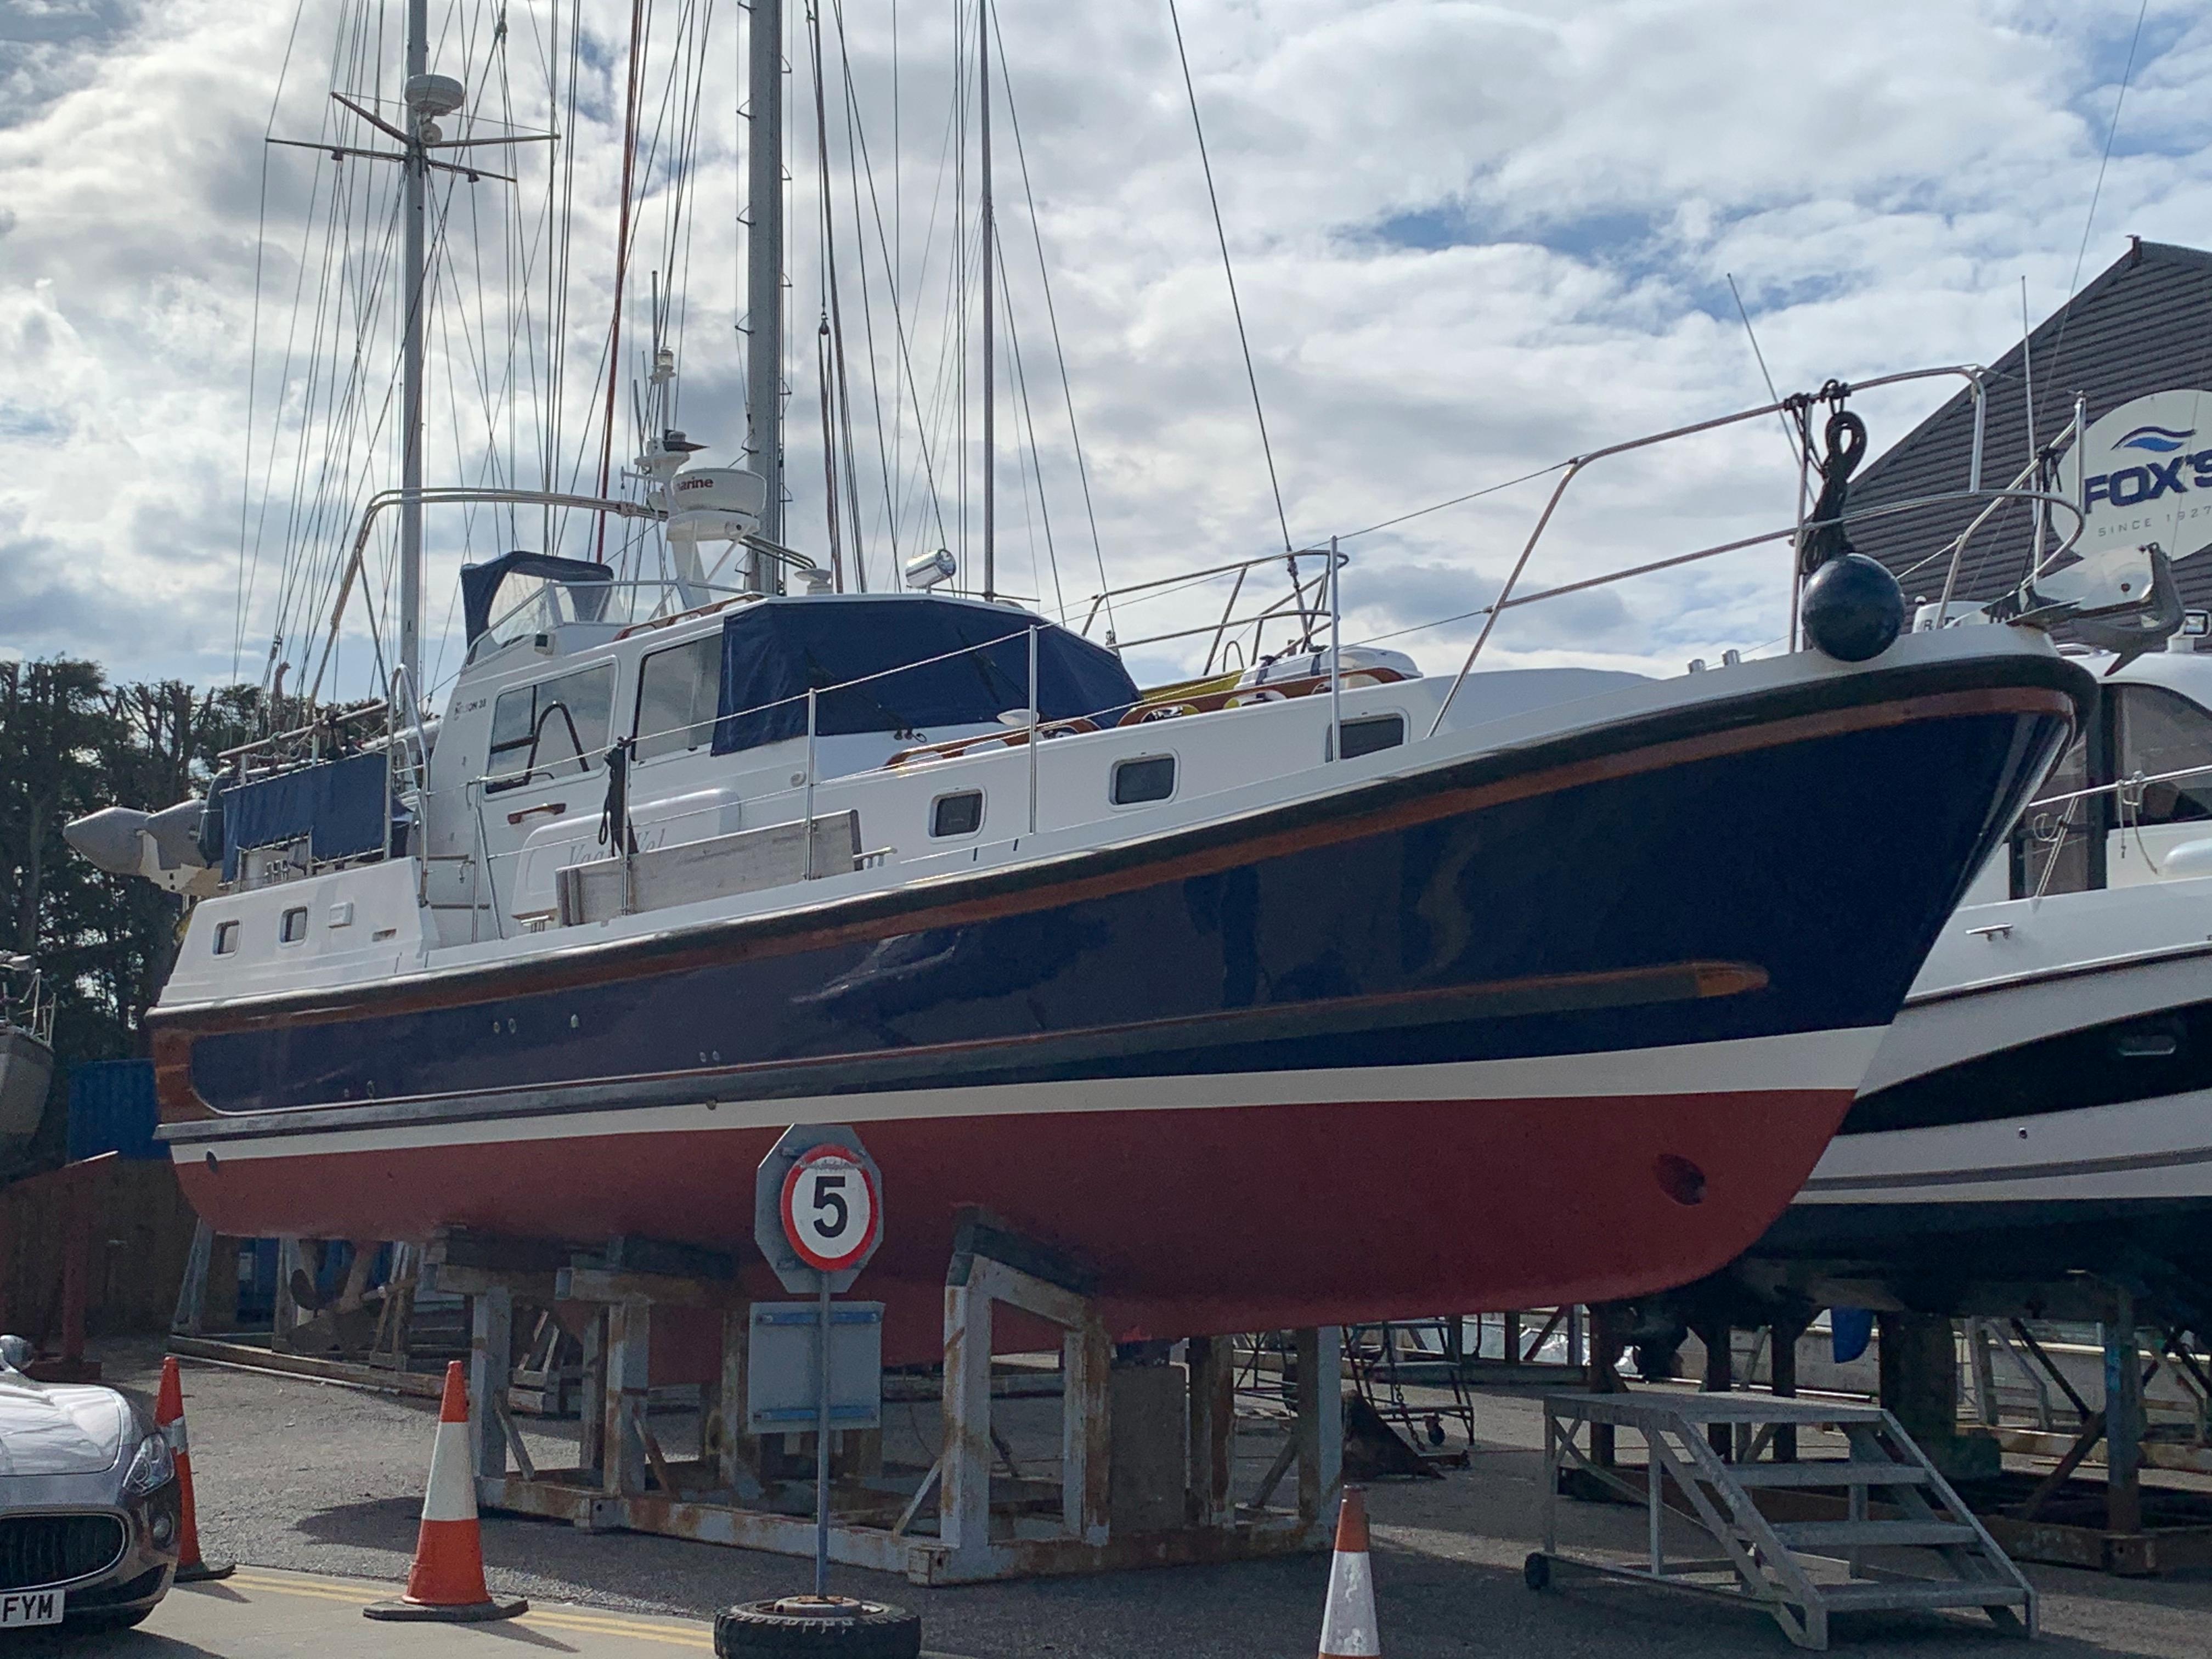 38 foot yacht for sale uk